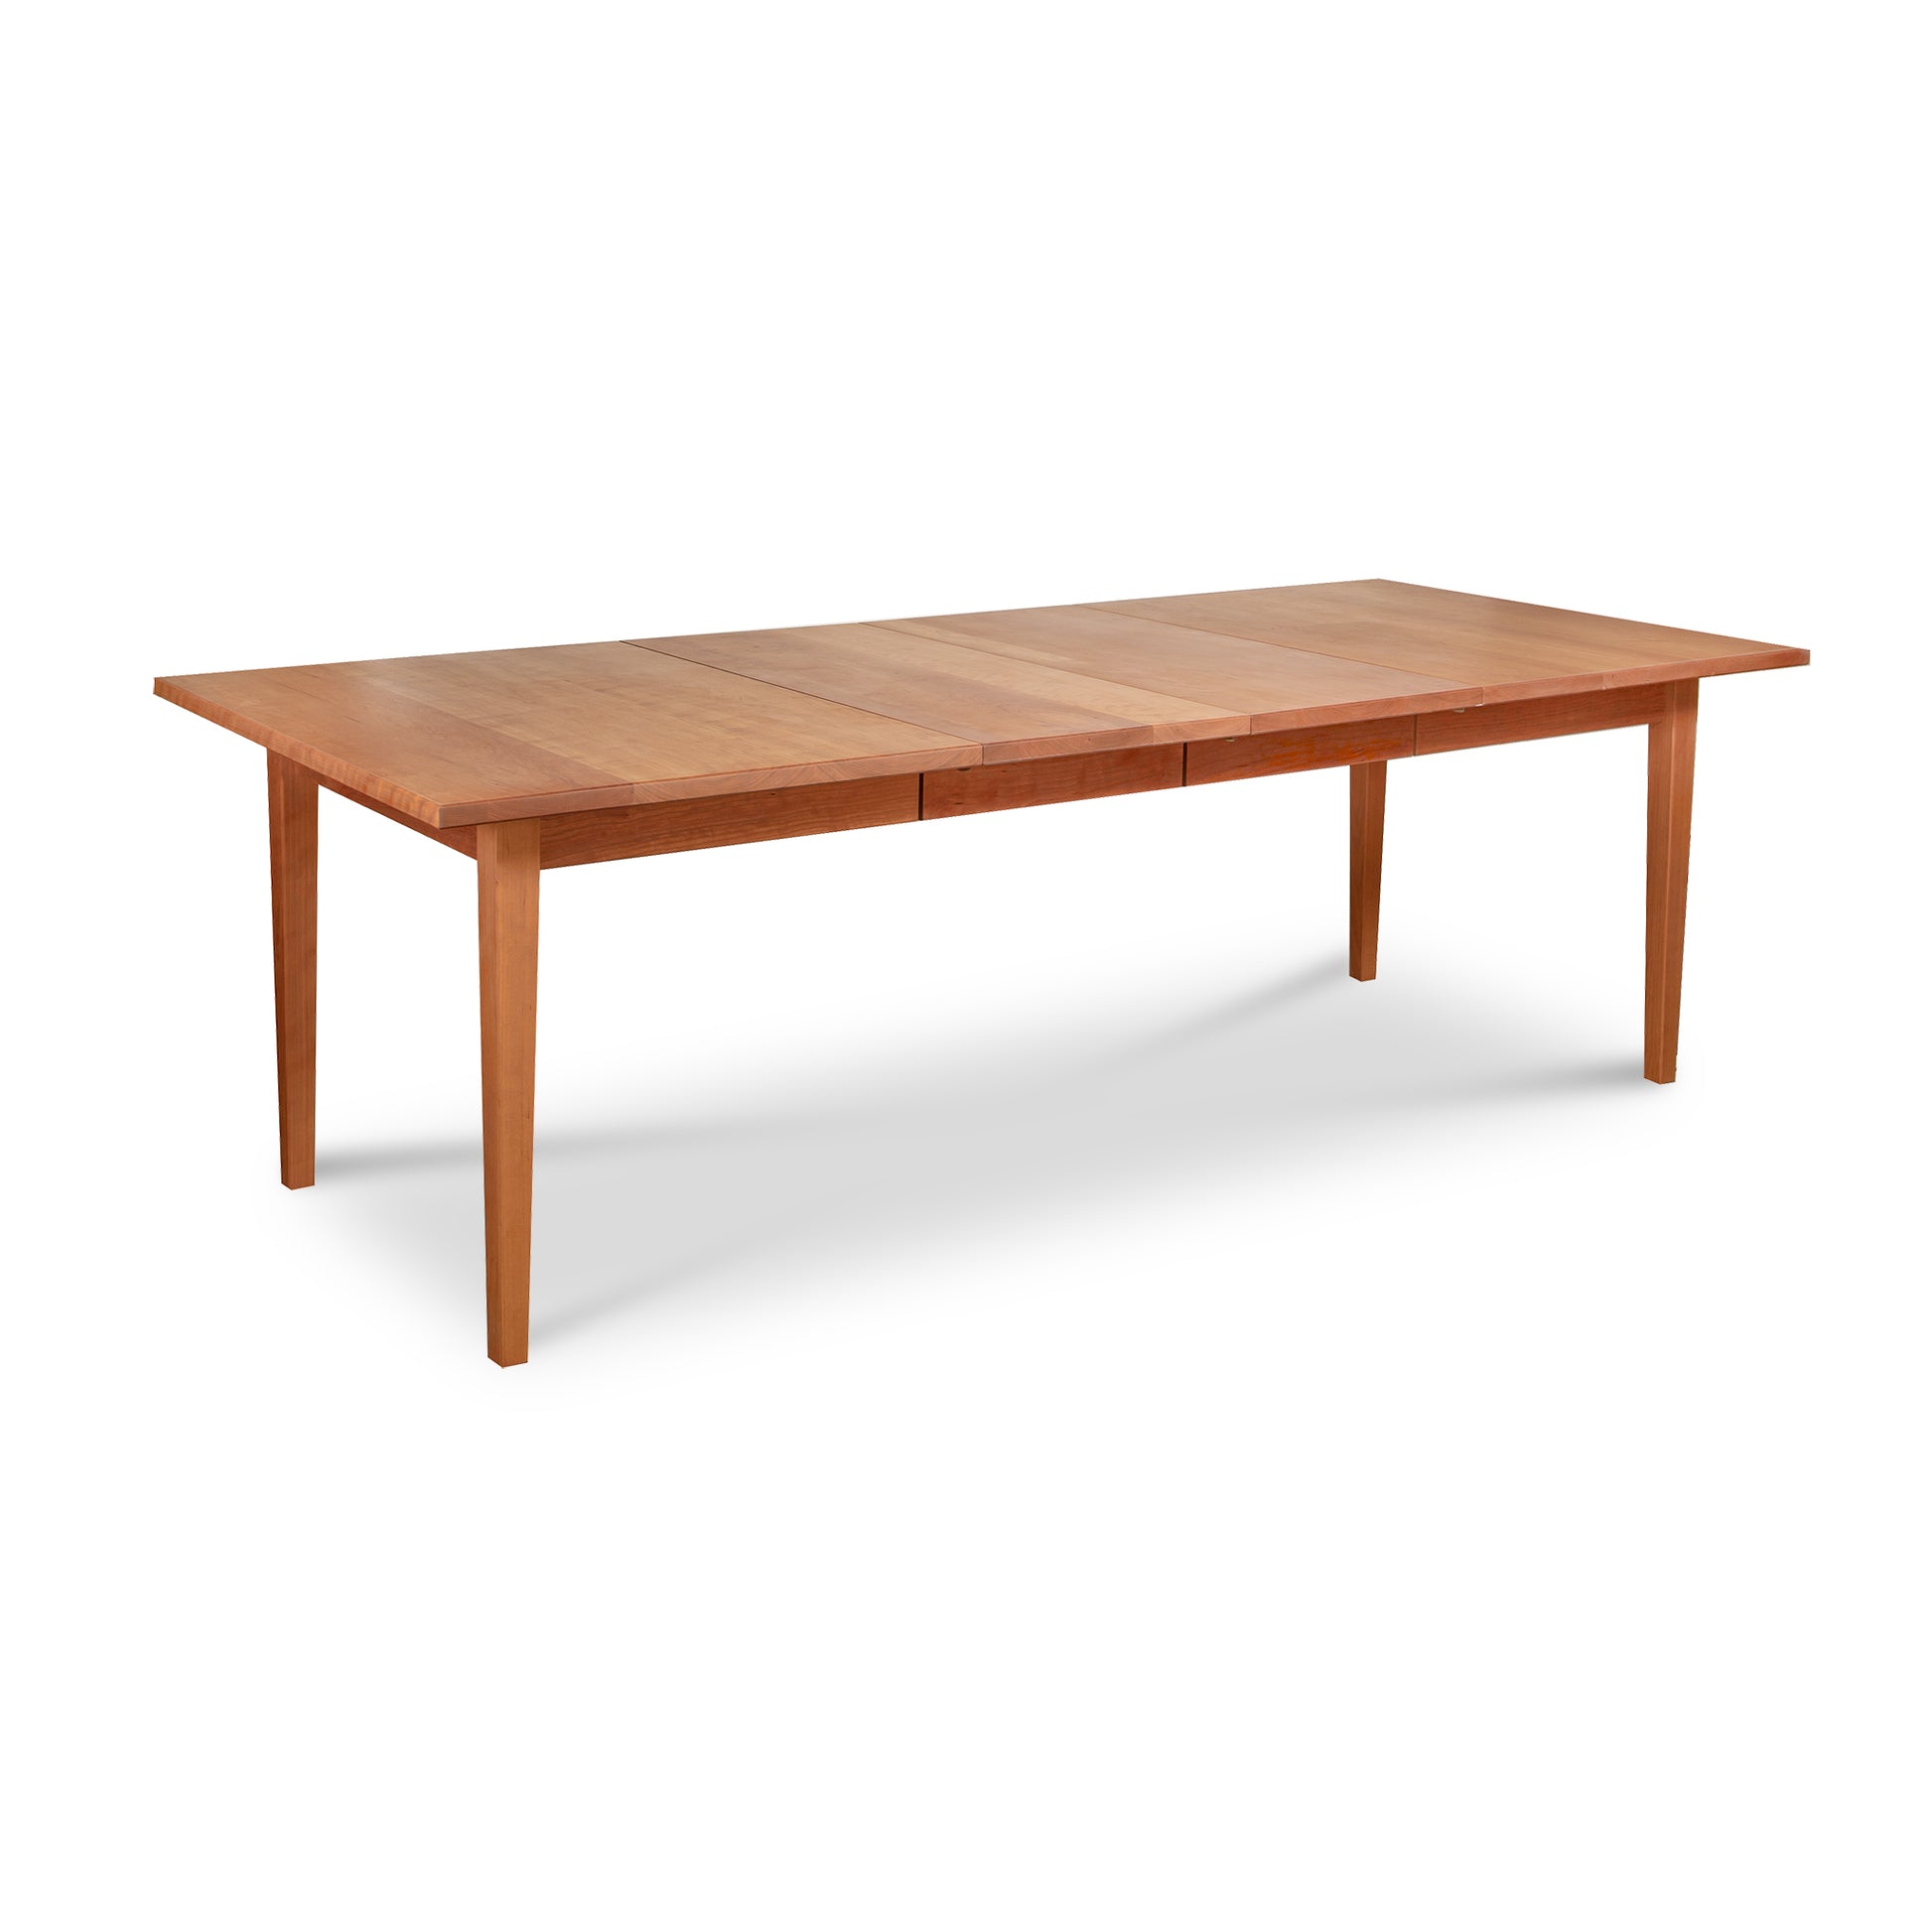 An extended Vermont Shaker Rectangular Extension Dining Table with a natural finish isolated on a white background by Maple Corner Woodworks.